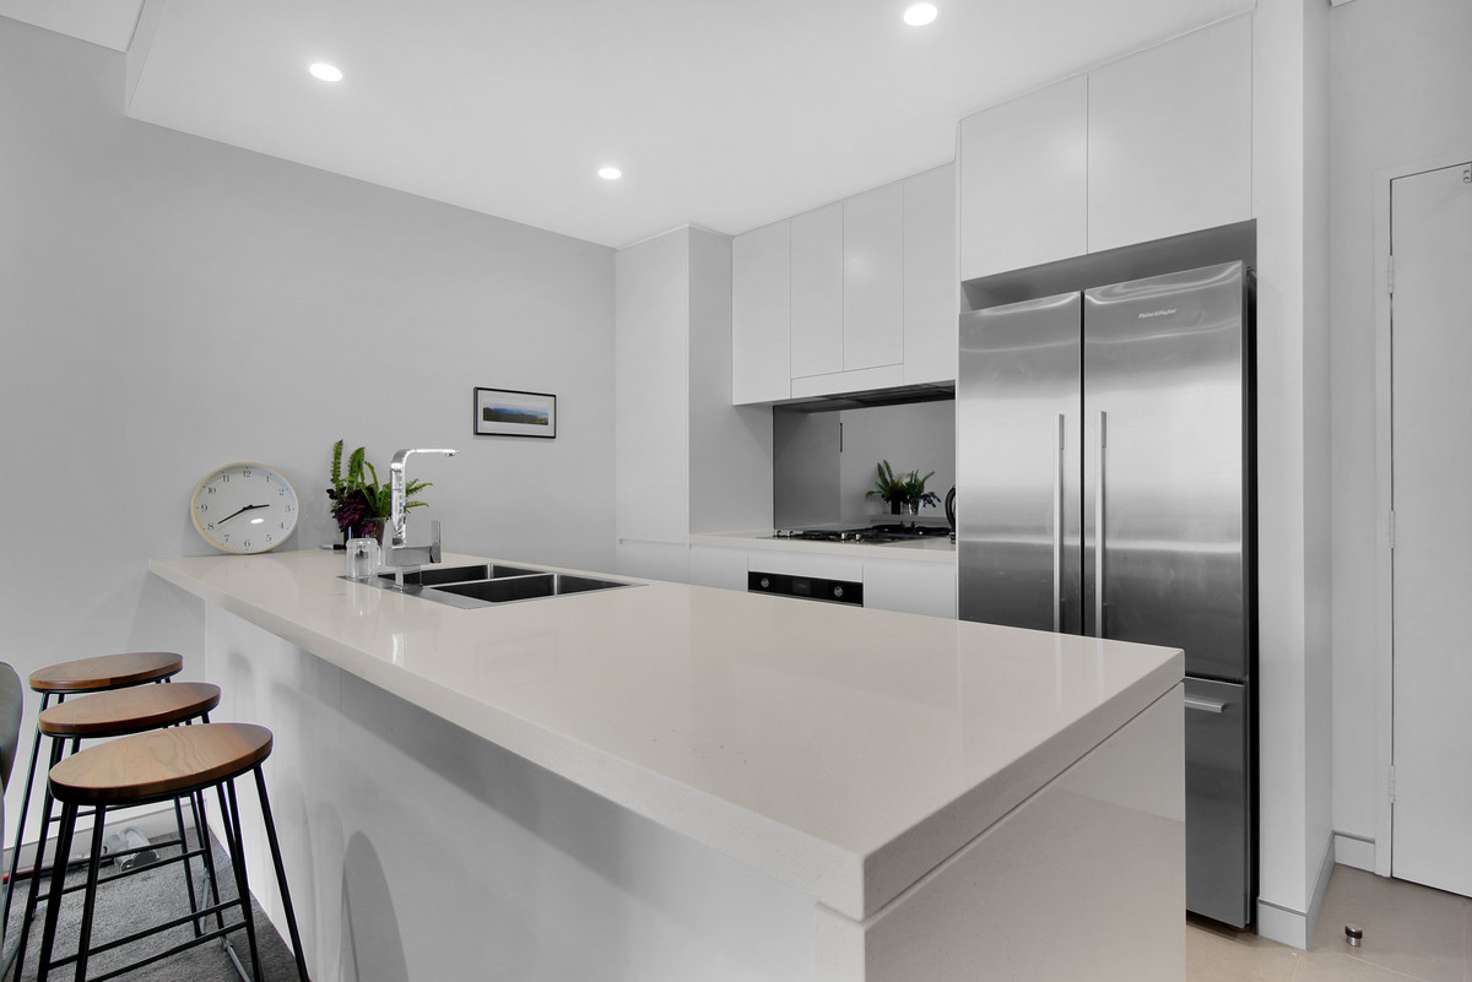 Main view of Homely apartment listing, 703/31 Crown Street, Wollongong NSW 2500